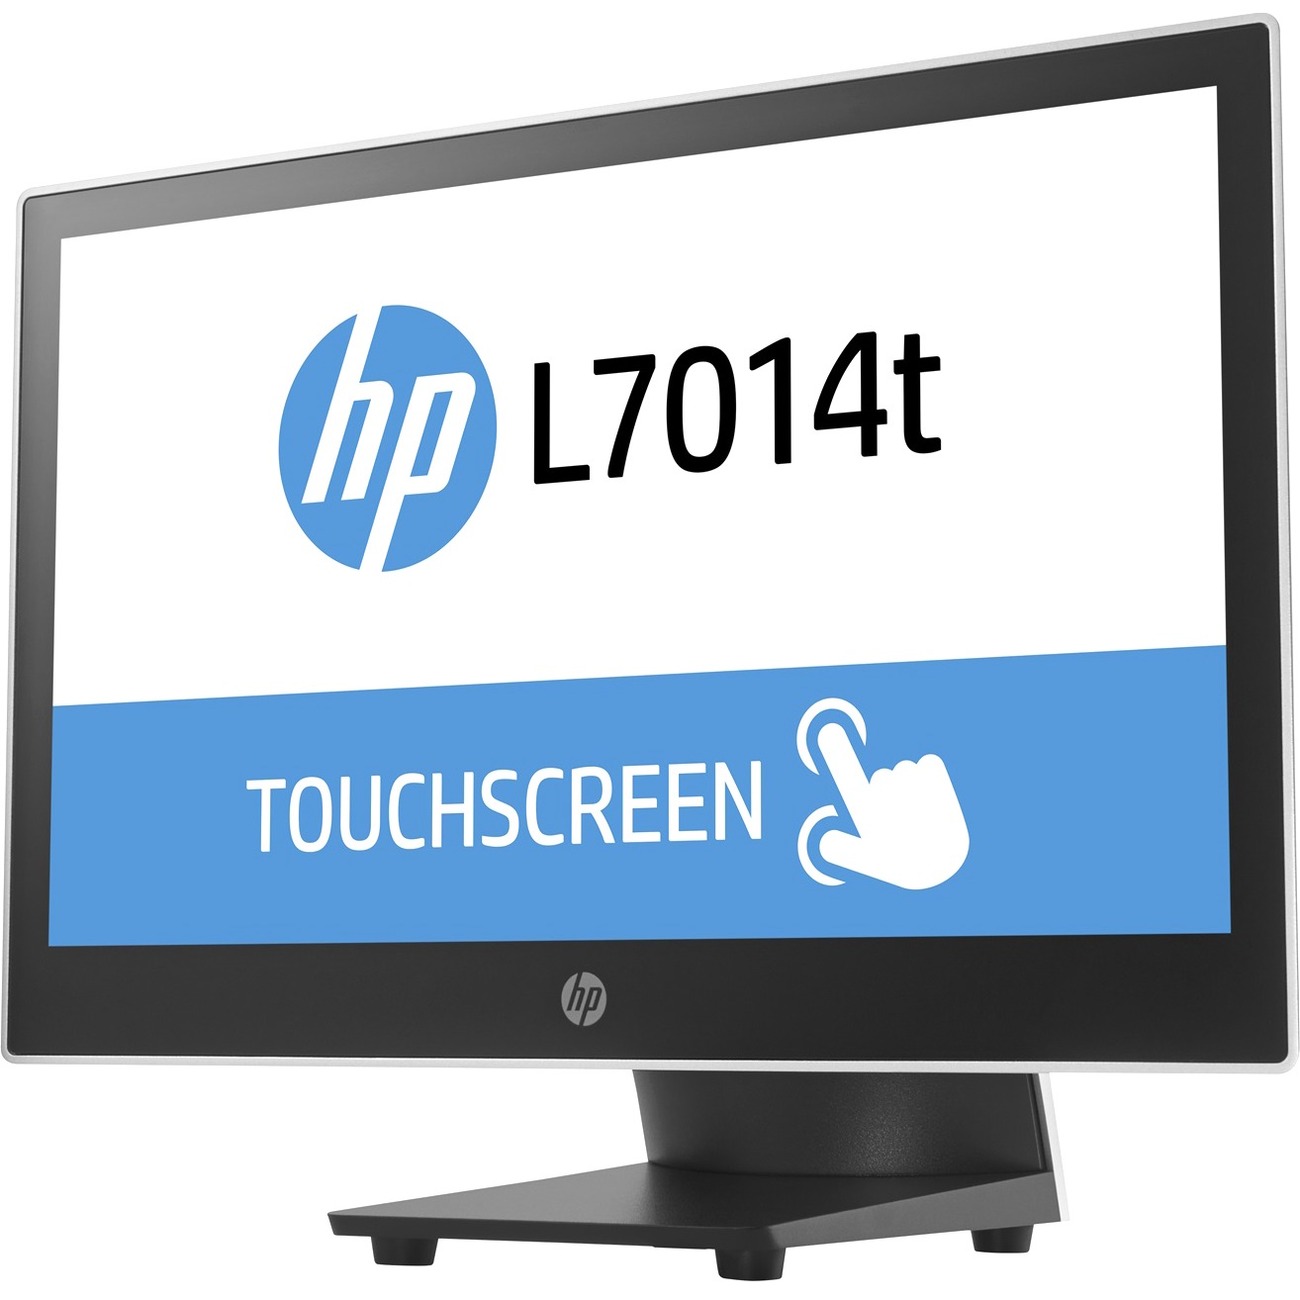 HP L7014t 14" LED Touchscreen Monitor - 16:9 - 16 ms_subImage_1